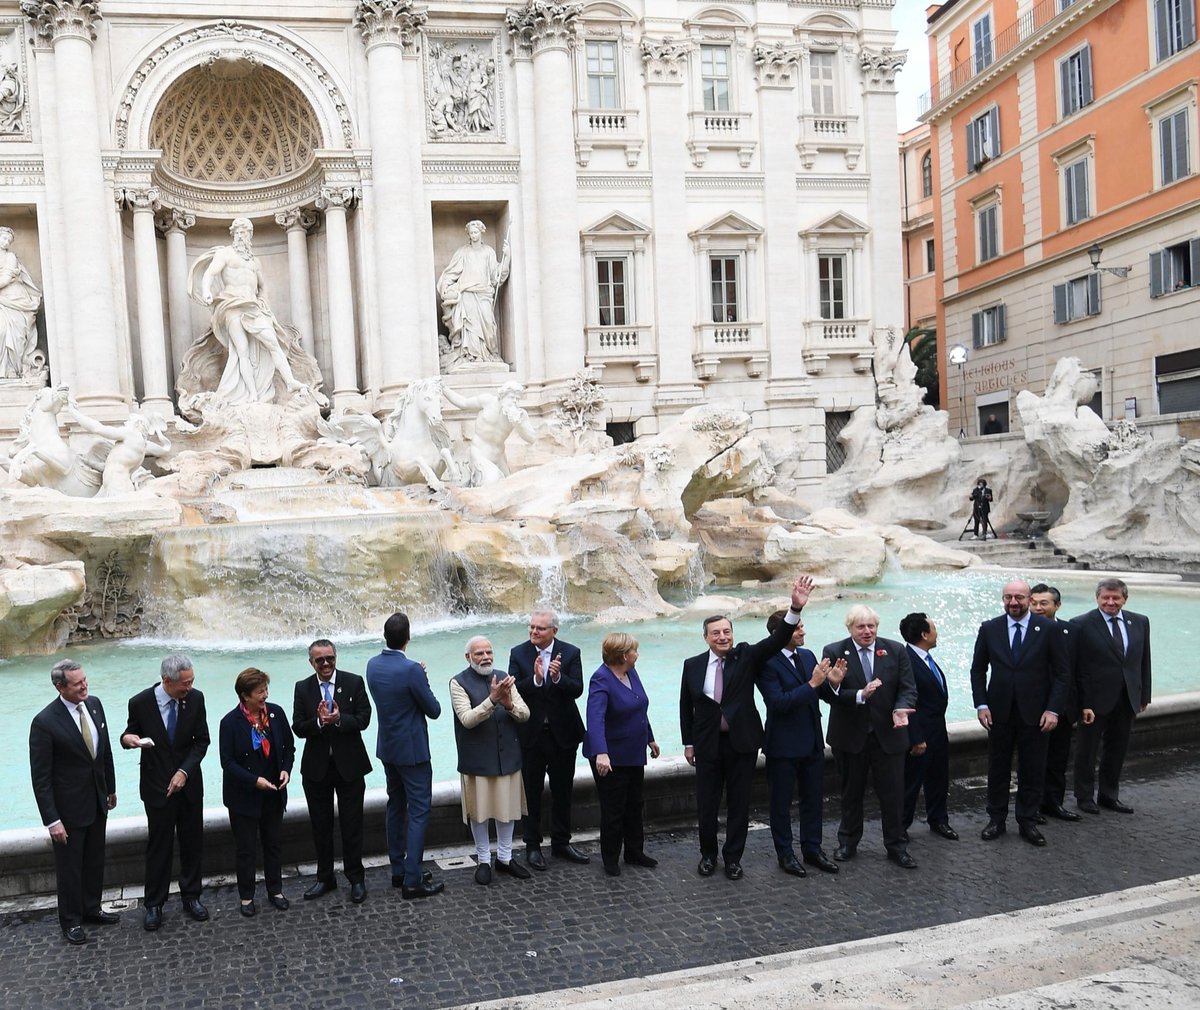 Joined the @g20org leaders at Rome’s beautiful Trevi Fountain.